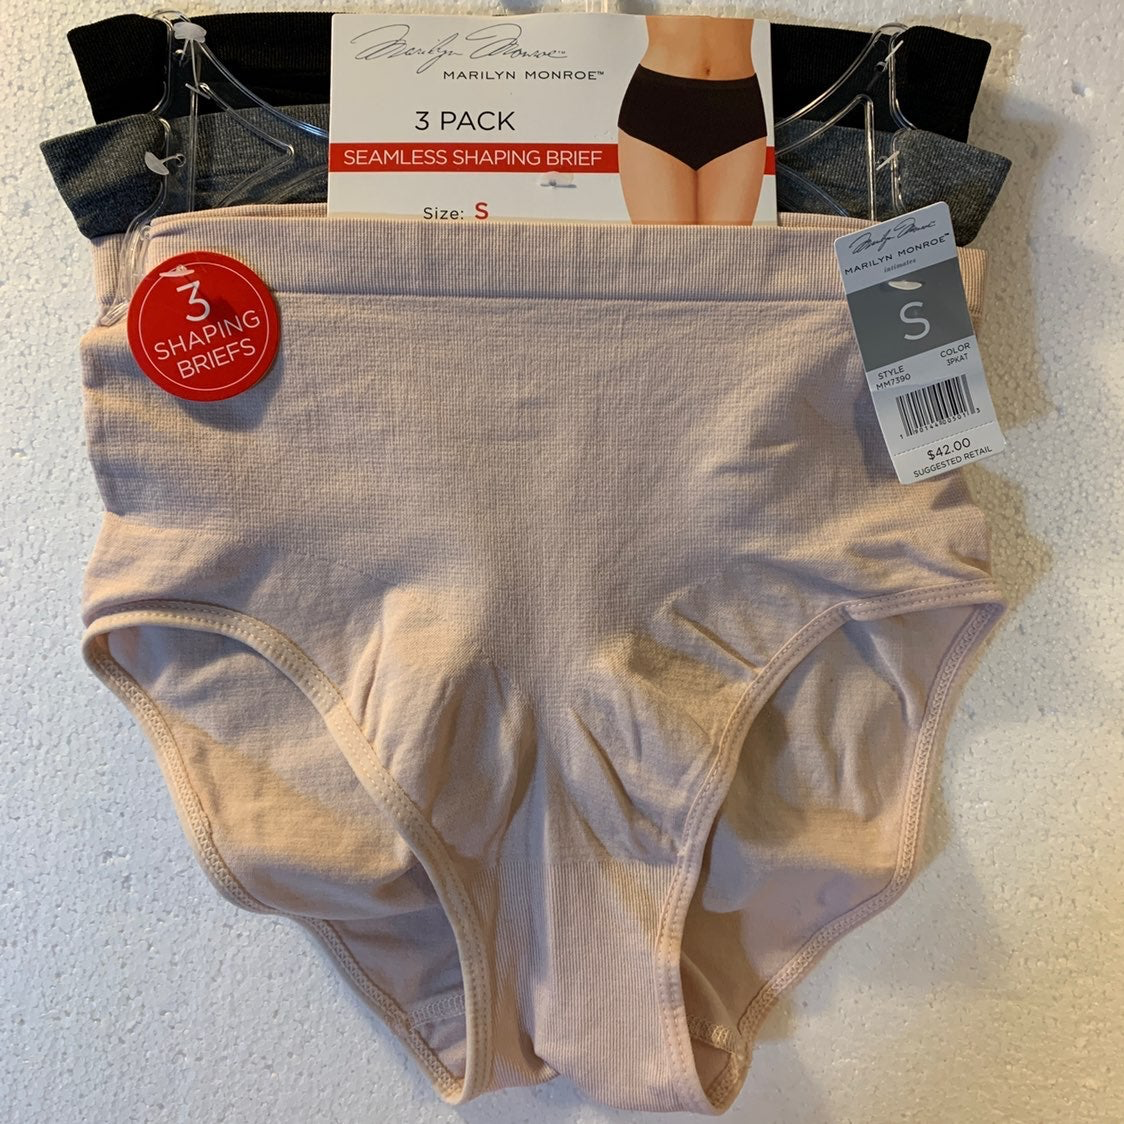 Marilyn Monroe Seamless Shaping Briefs and similar items